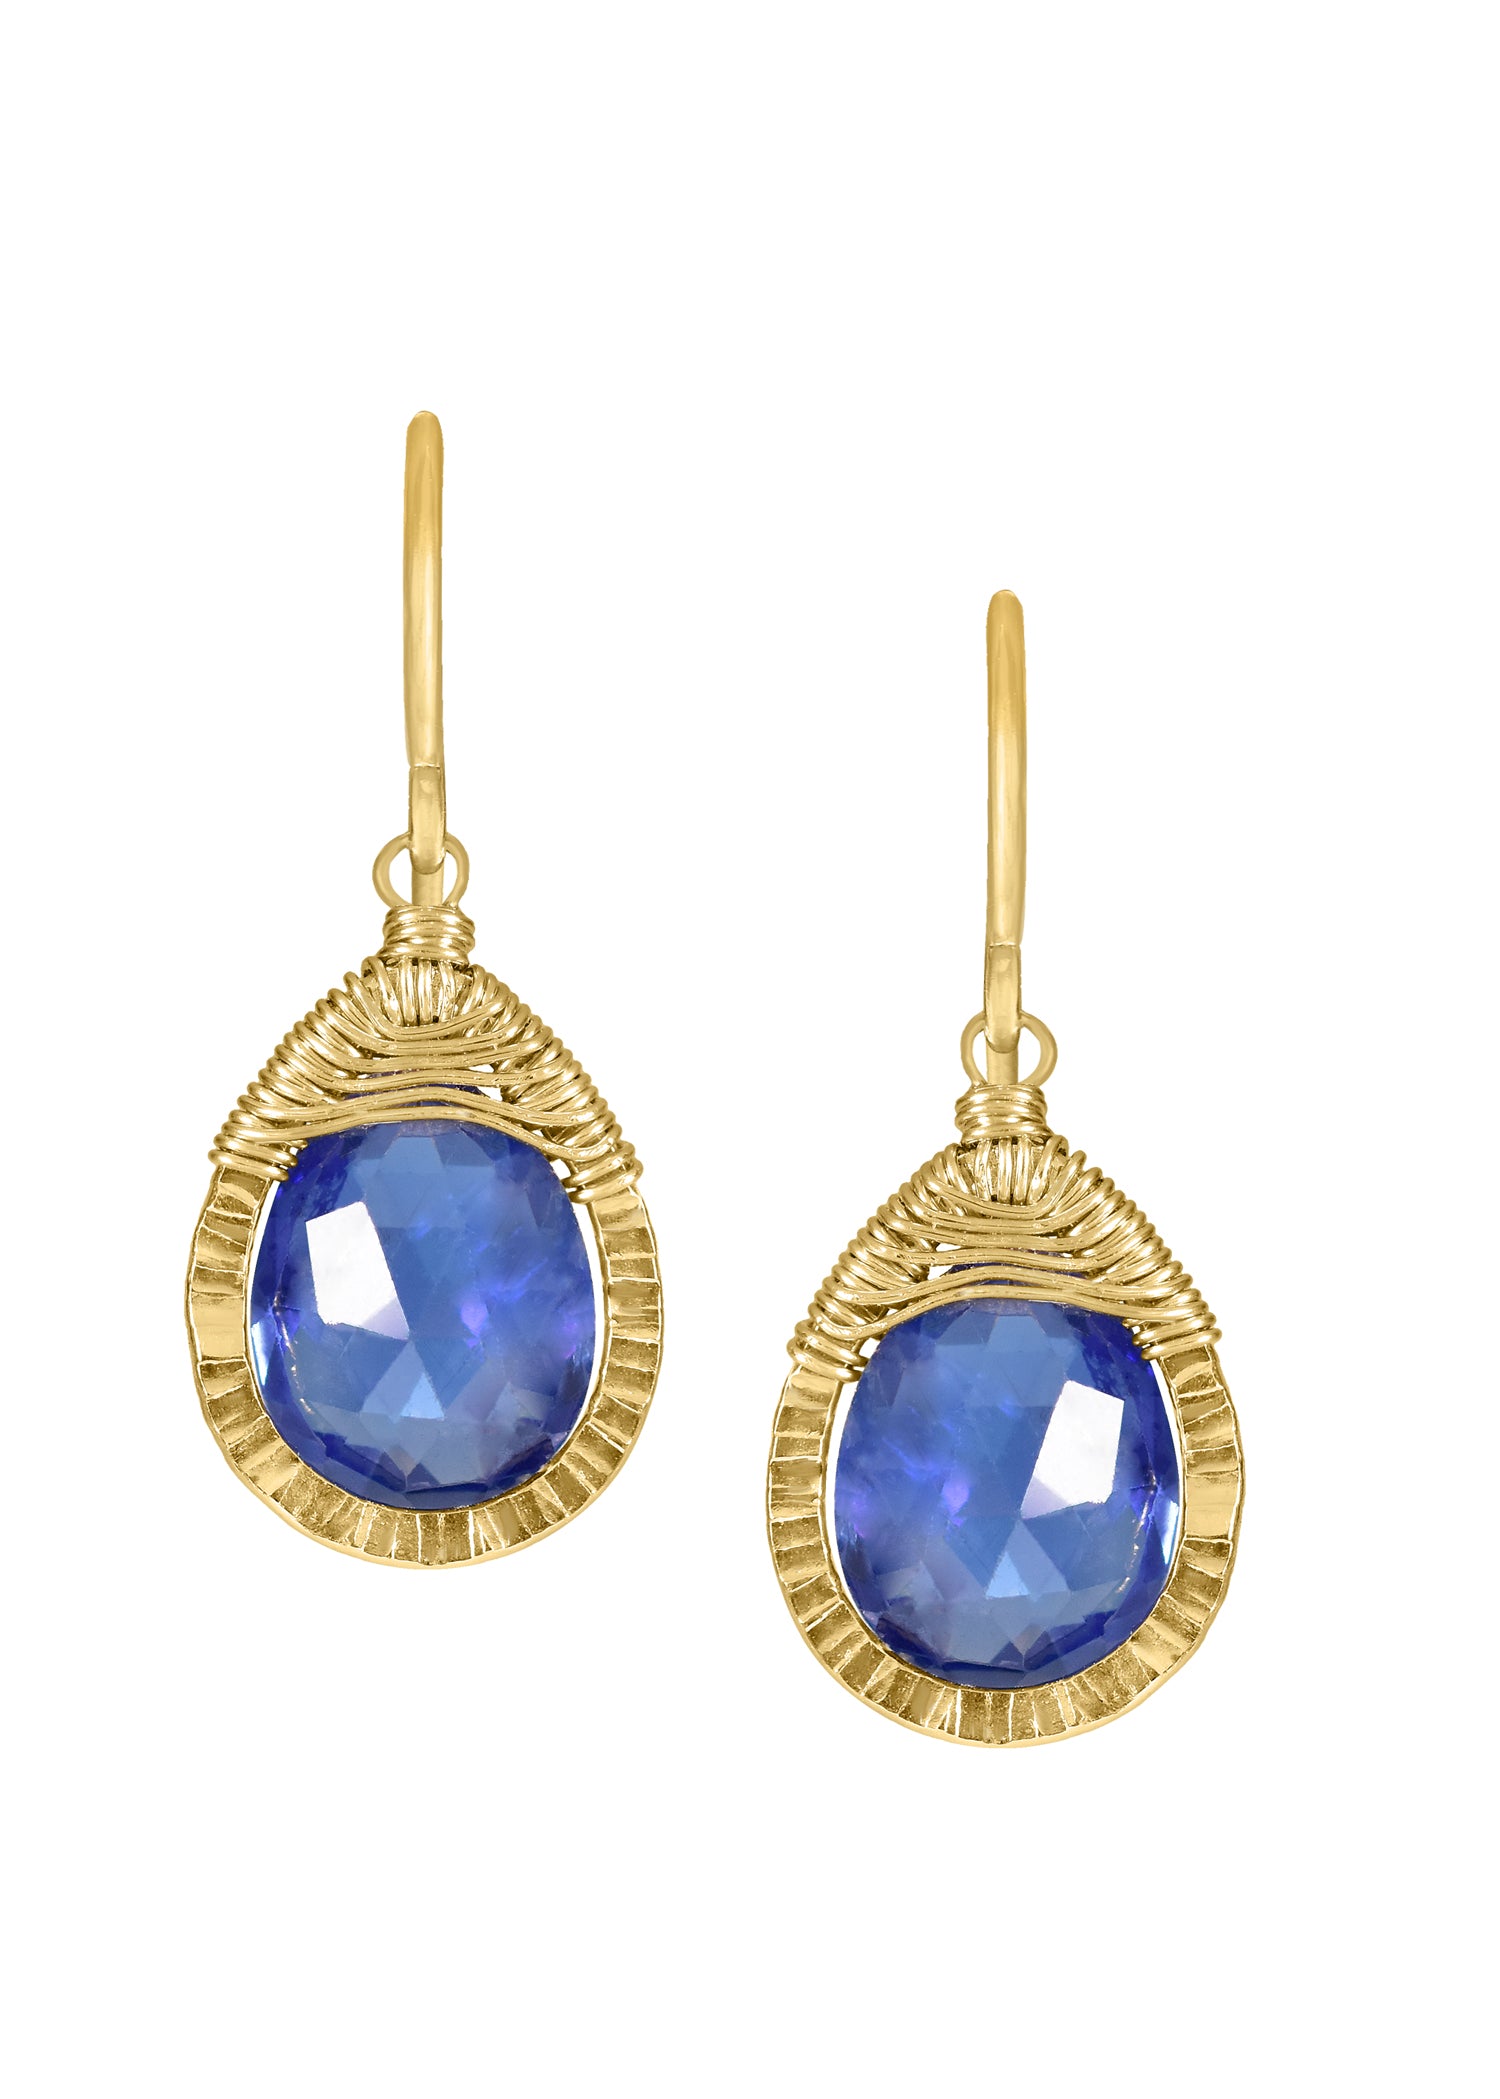 Kyanite 14k gold fill Earrings measure 15/16" in length (including the ear wires) and 3/8" in width at the widest point Handmade in our Los Angeles studio